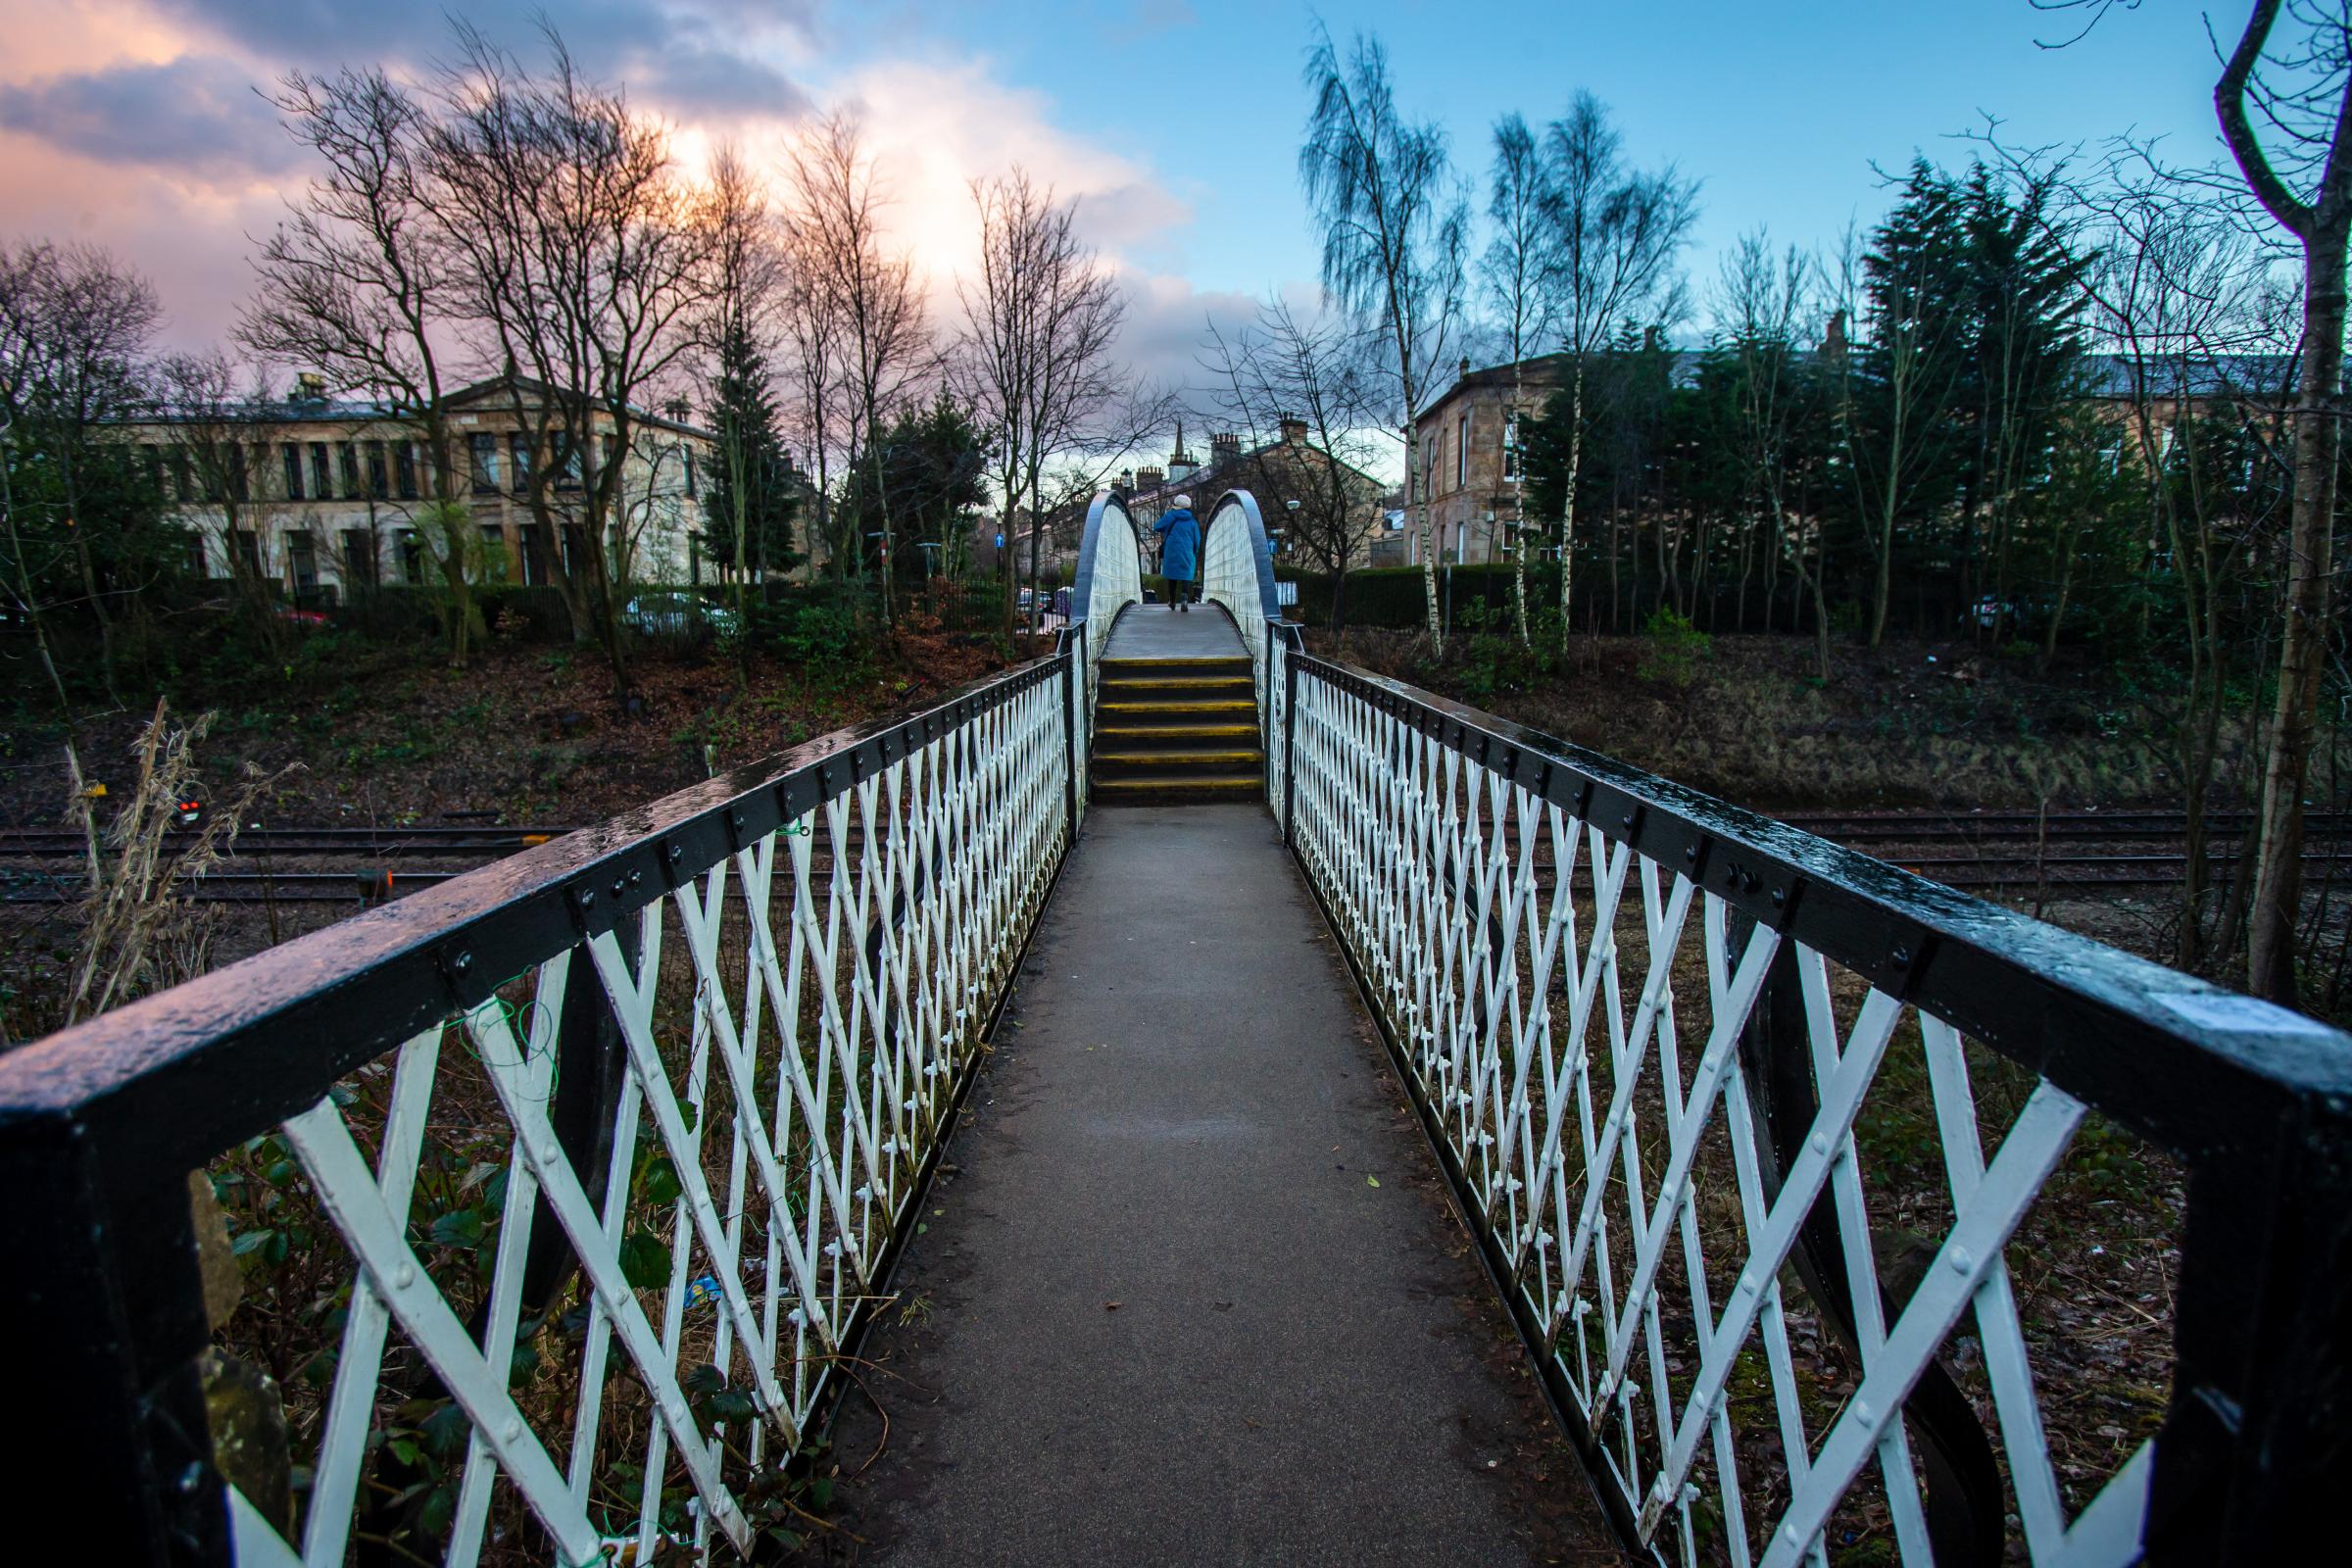 Strathbungo footbridge that connects Darnley Road and Moray Place in Strathbungo over a railway line Picture: Colin Mearns